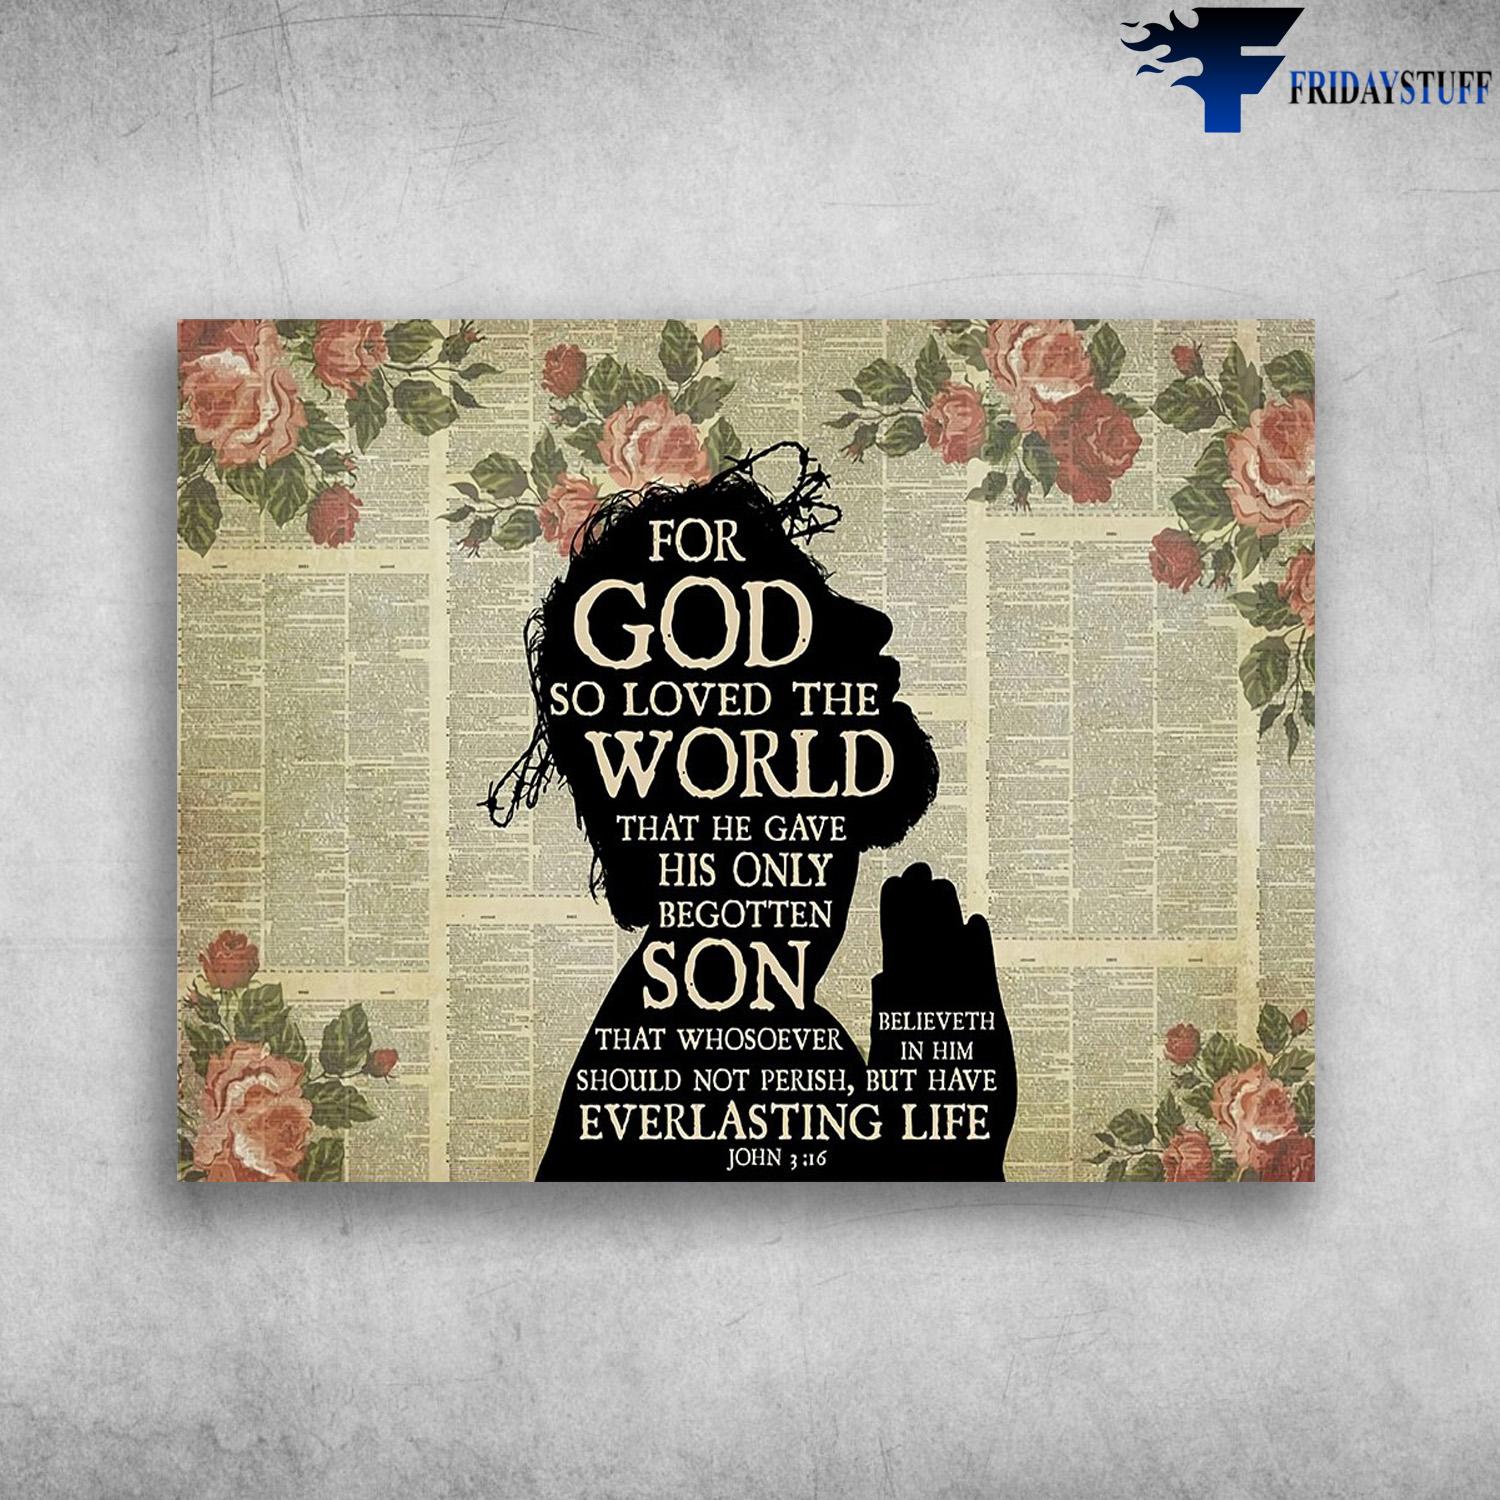 Jesus Poster, For God, So Loved The World, That He Gave His Only Begotten Son, That Whosoever, Should Not Perish